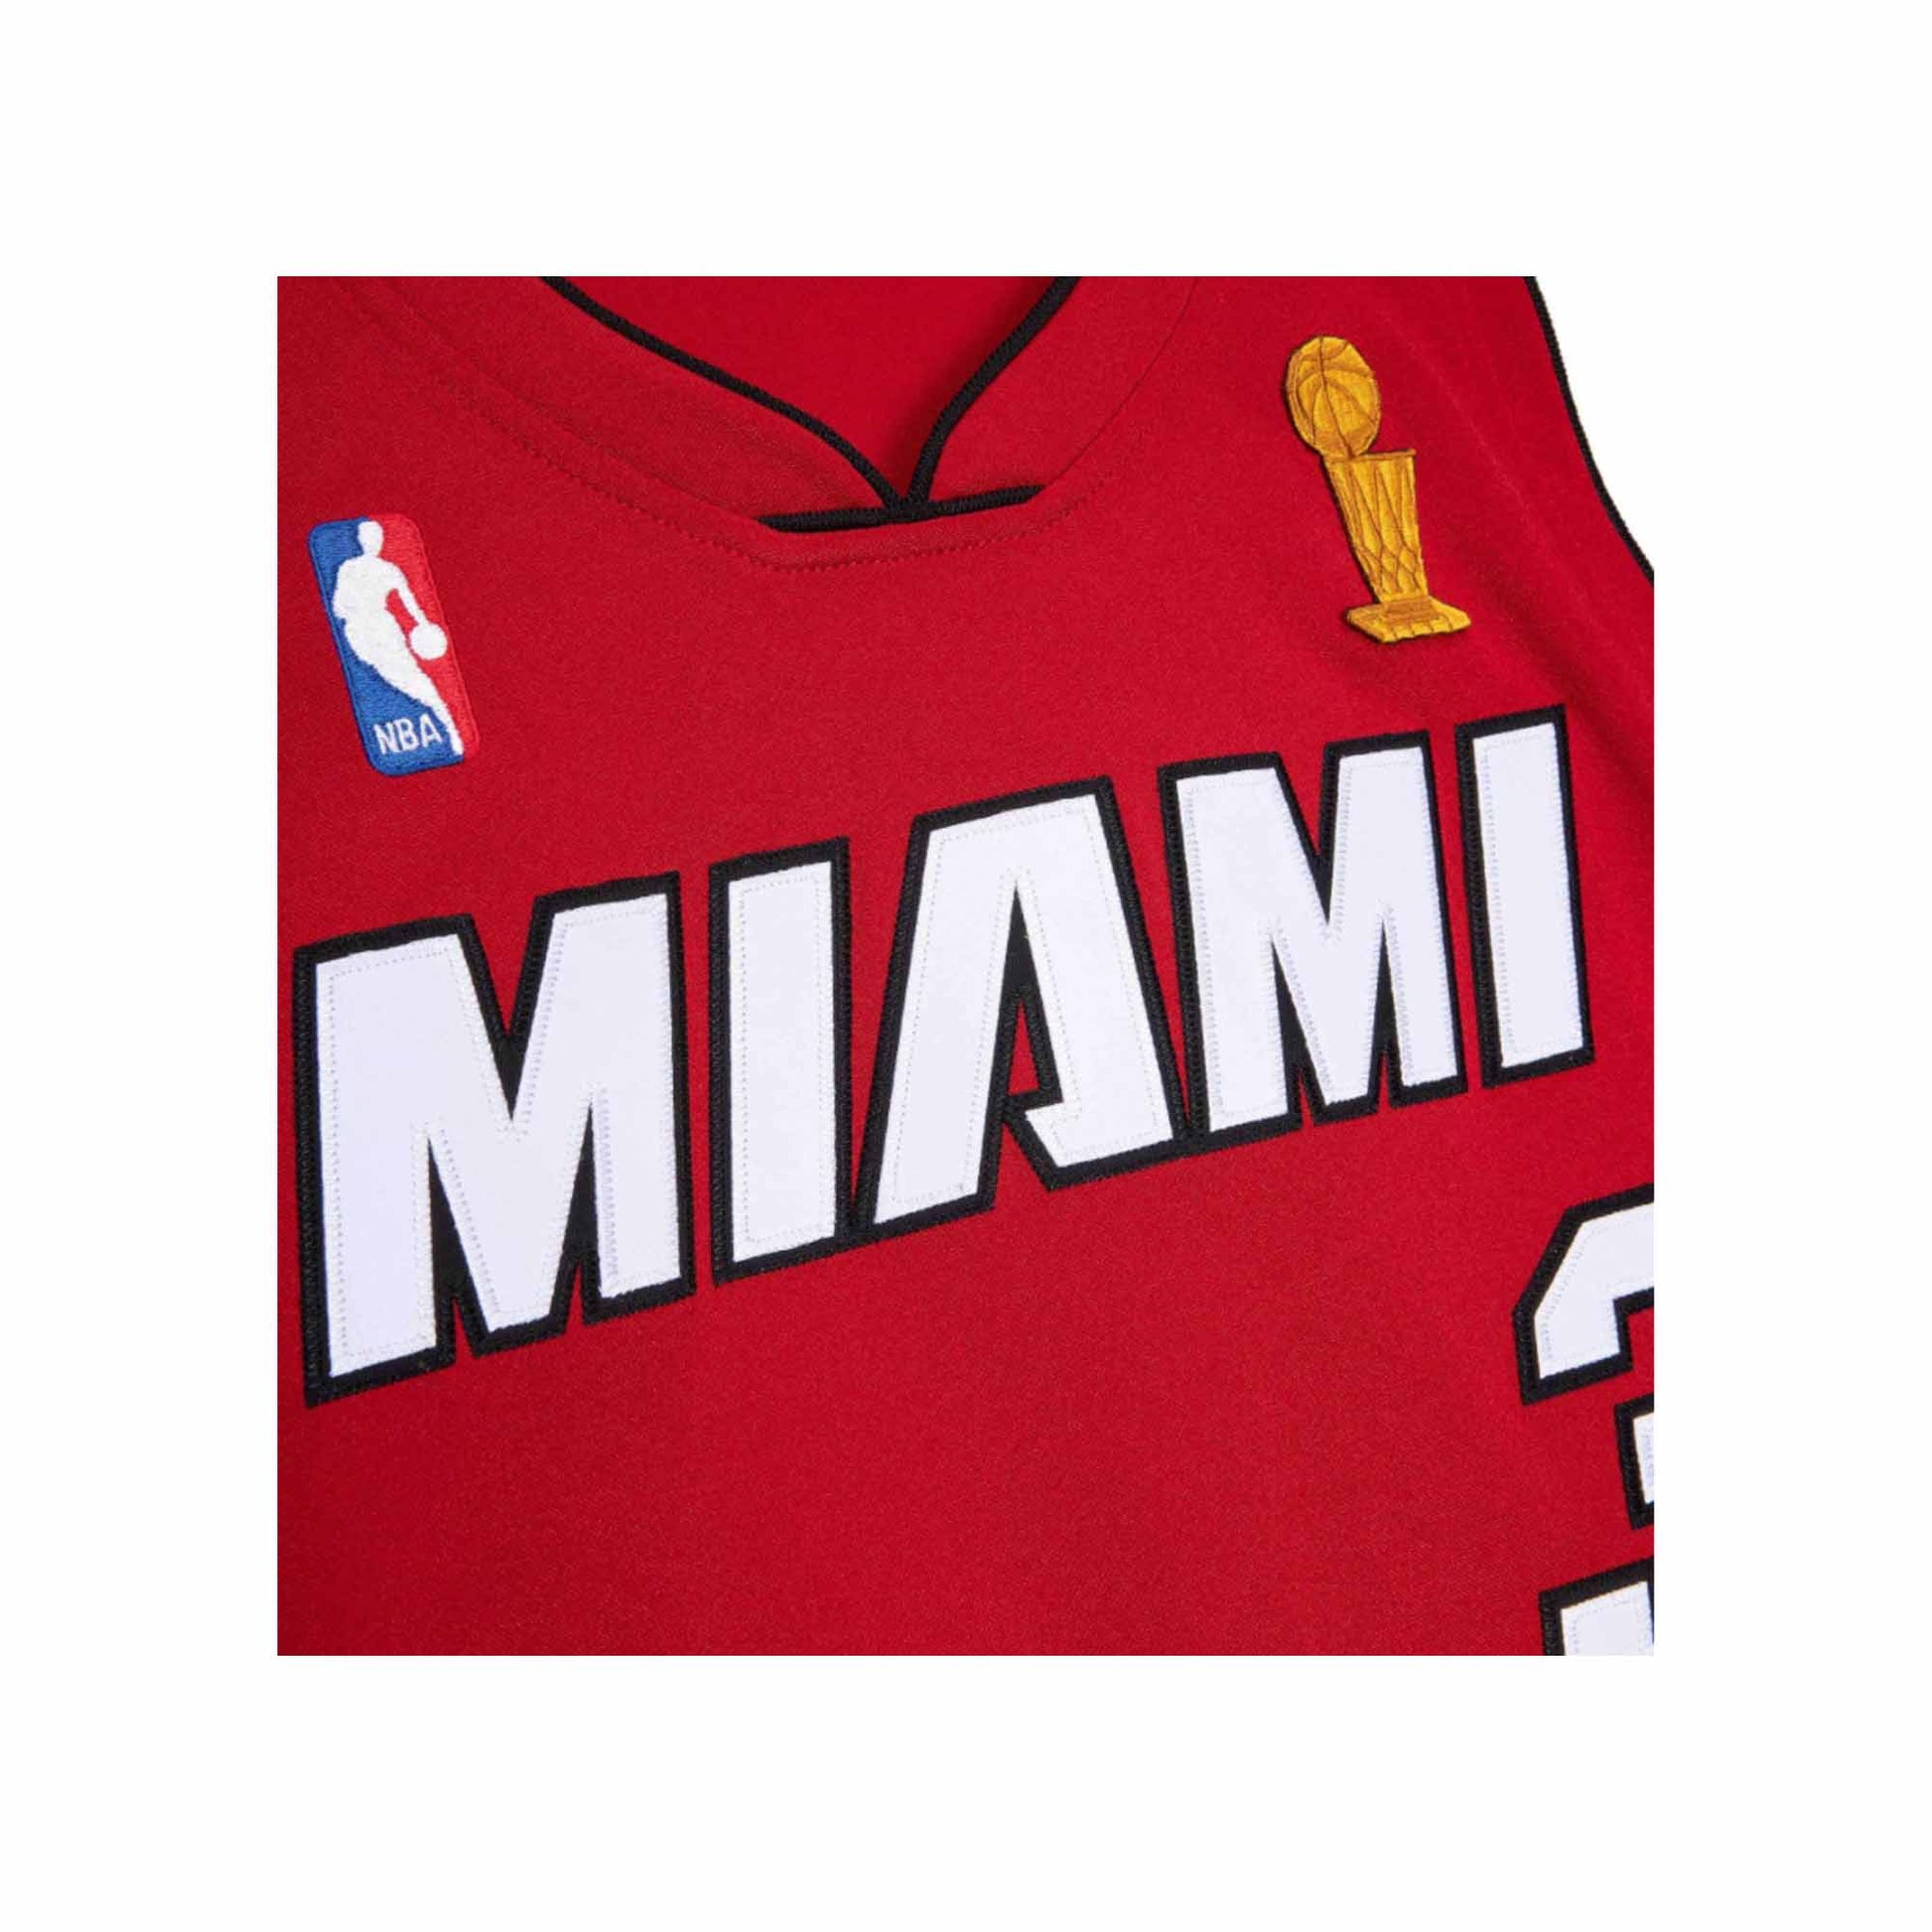 Dwyane Wade 3 Miami Heat 2005-06 Mitchell and Ness Authentic Finals Jersey